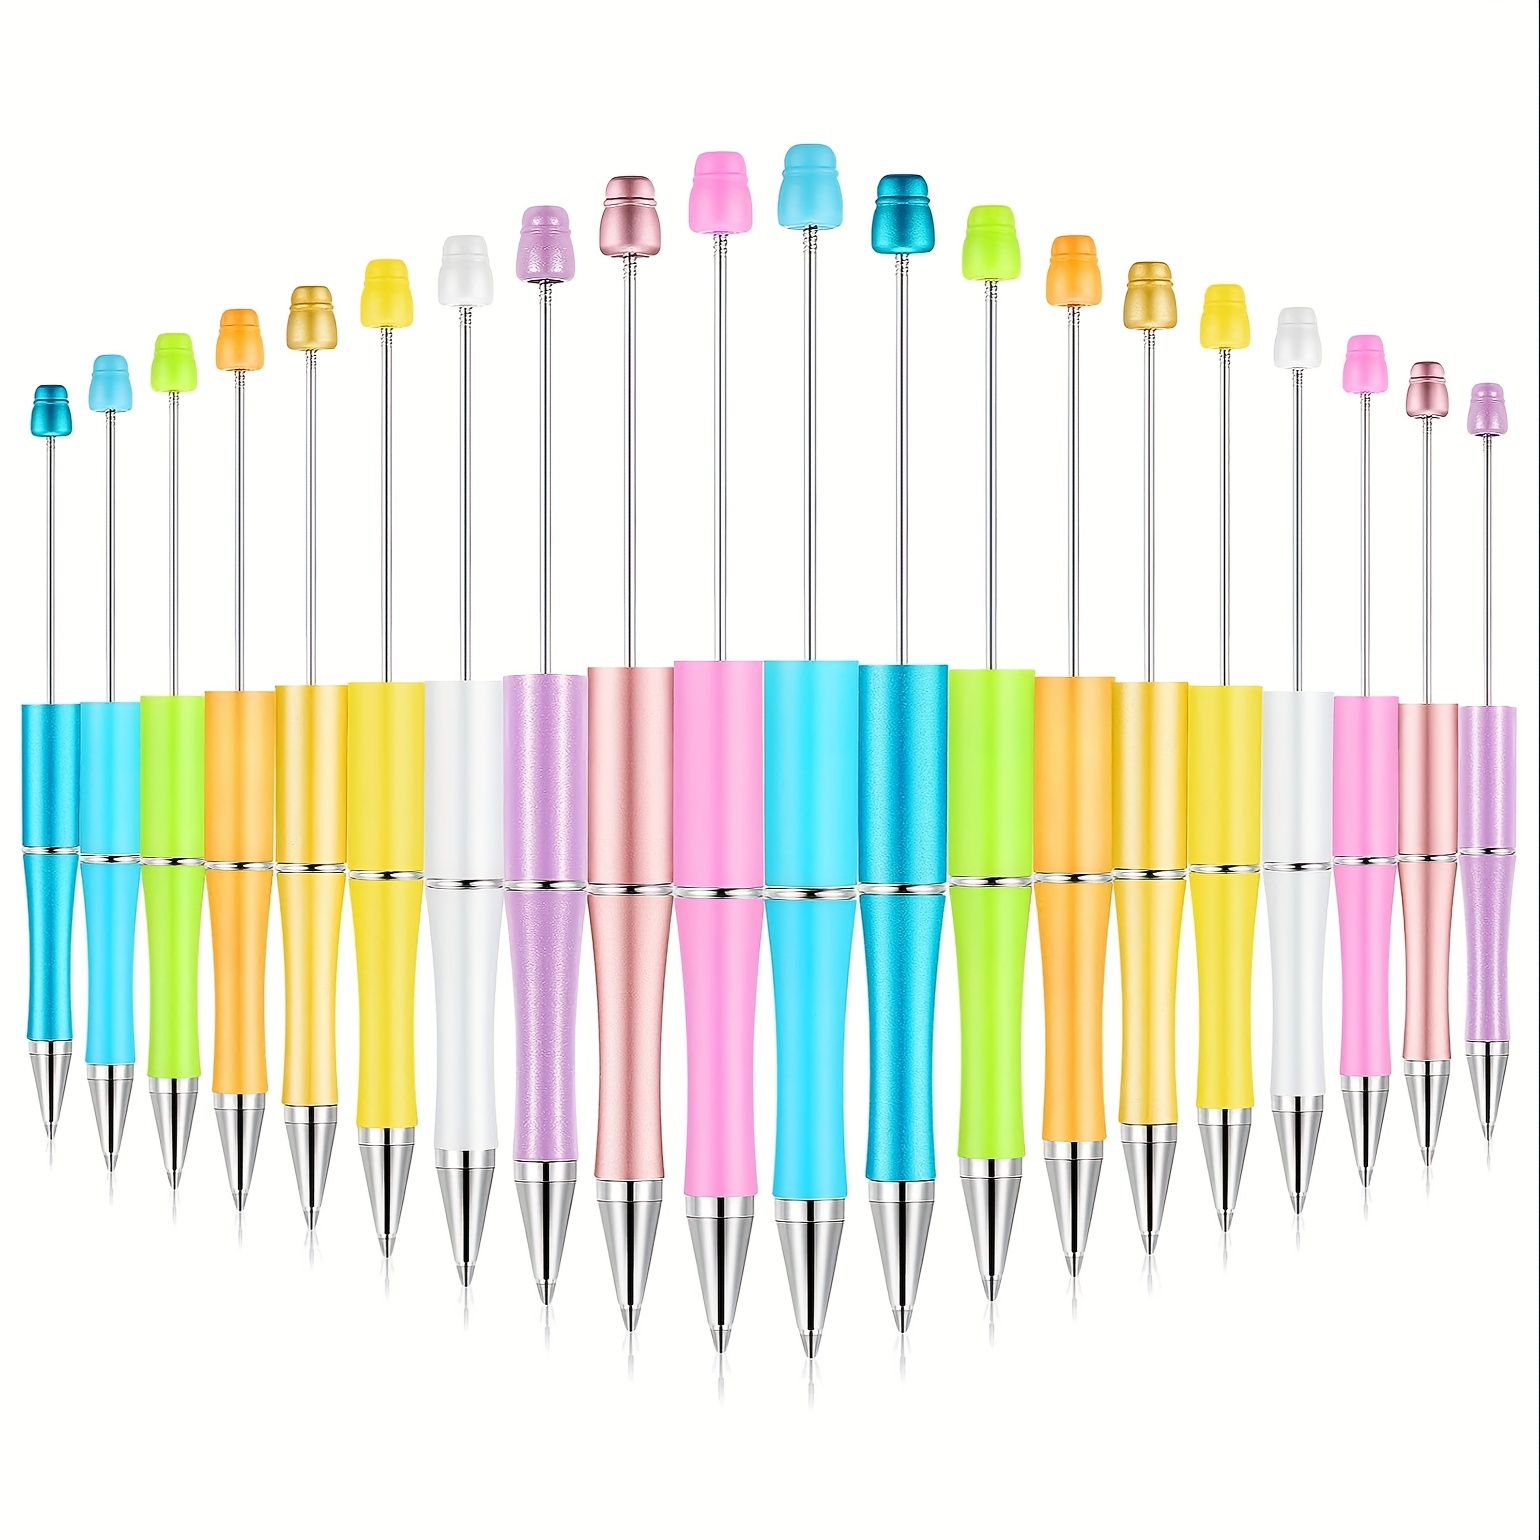 Plastic Beadable Pen Bead Ballpoint Pen Assorted Bead Pen Shaft Black Ink  Rollerball Pen with Extra Refills for Kids Students Office School Supplies,  10 Colors (10) : Office Products 